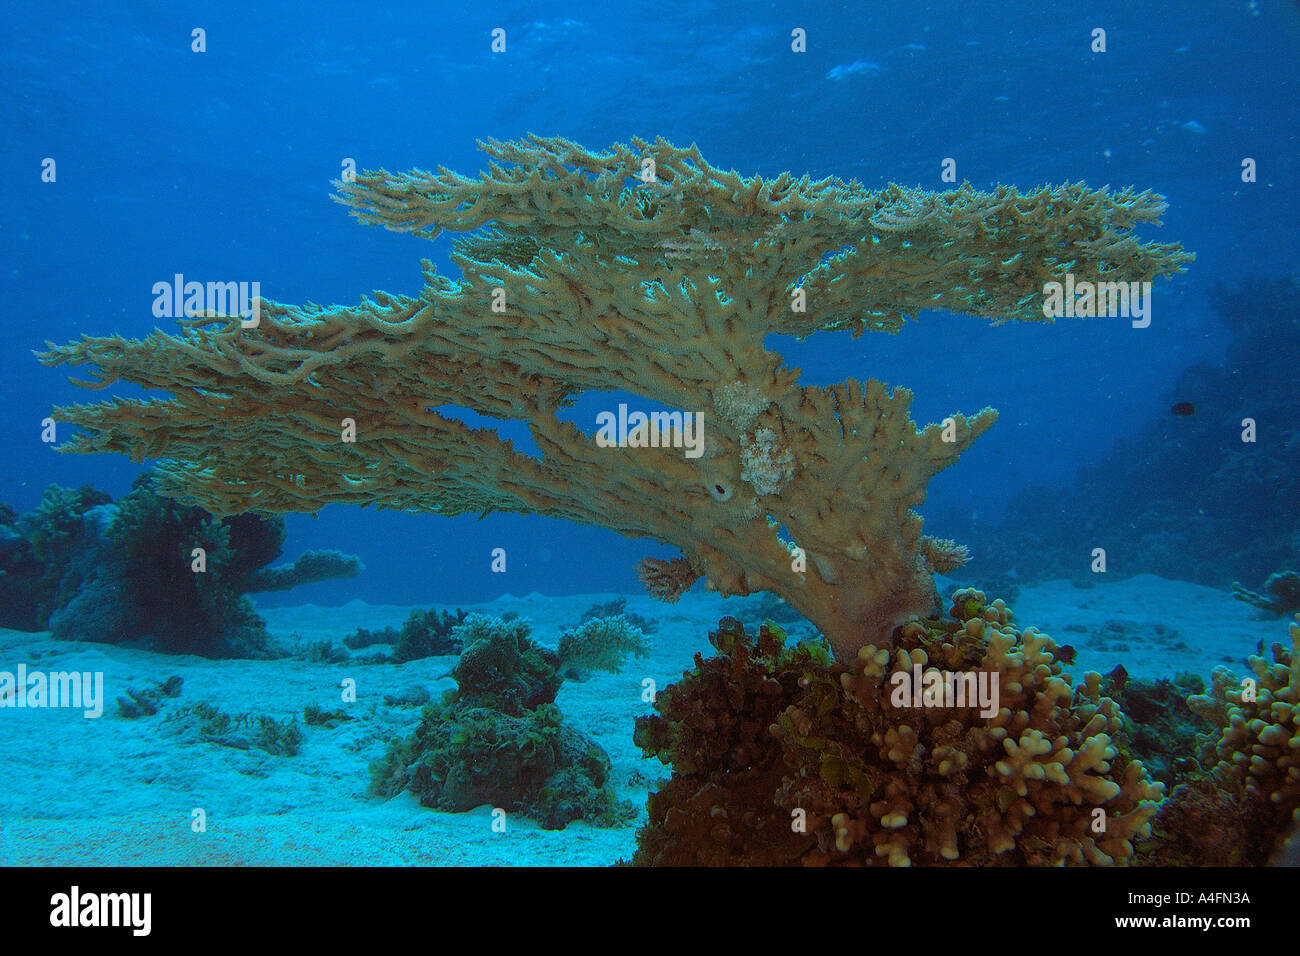 Staghorn coral Acropora sp Namu atoll Marshall Islands N Pacific Stock Photo